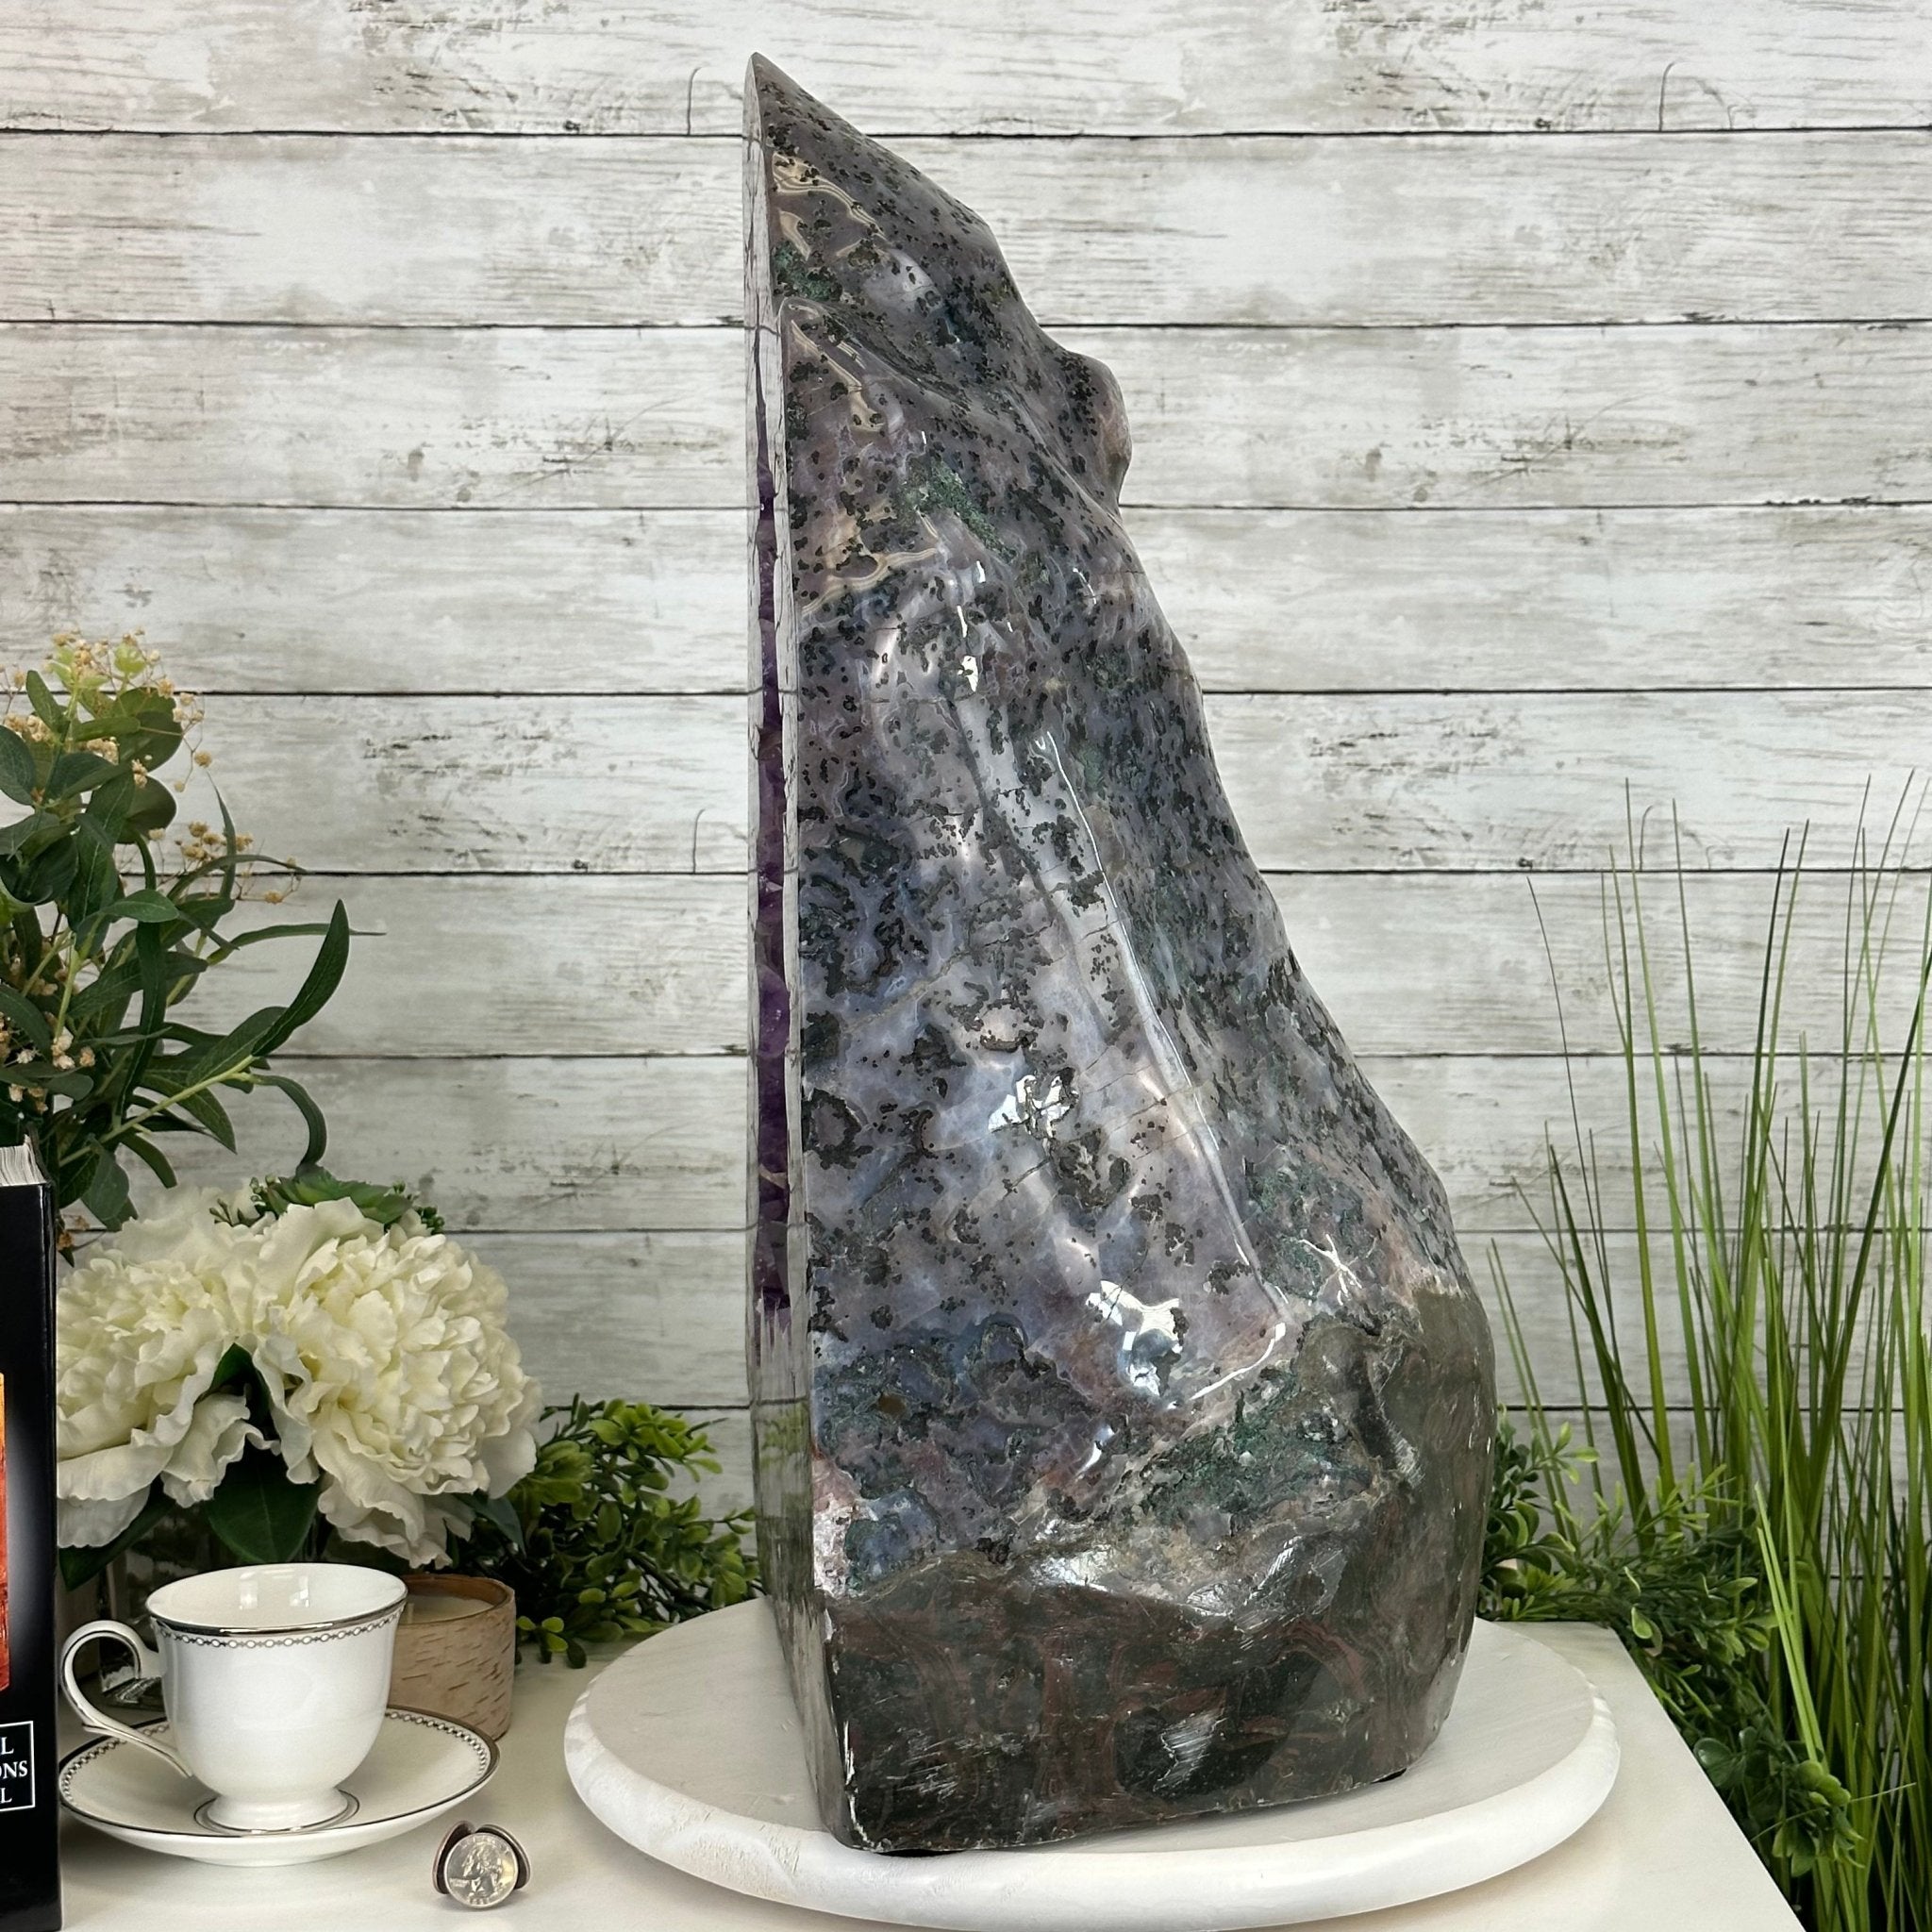 Extra Plus Quality Polished Brazilian Amethyst Cathedral, 114.2 lbs & 23" tall Model #5602-0166 by Brazil Gems - Brazil GemsBrazil GemsExtra Plus Quality Polished Brazilian Amethyst Cathedral, 114.2 lbs & 23" tall Model #5602-0166 by Brazil GemsPolished Cathedrals5602-0166